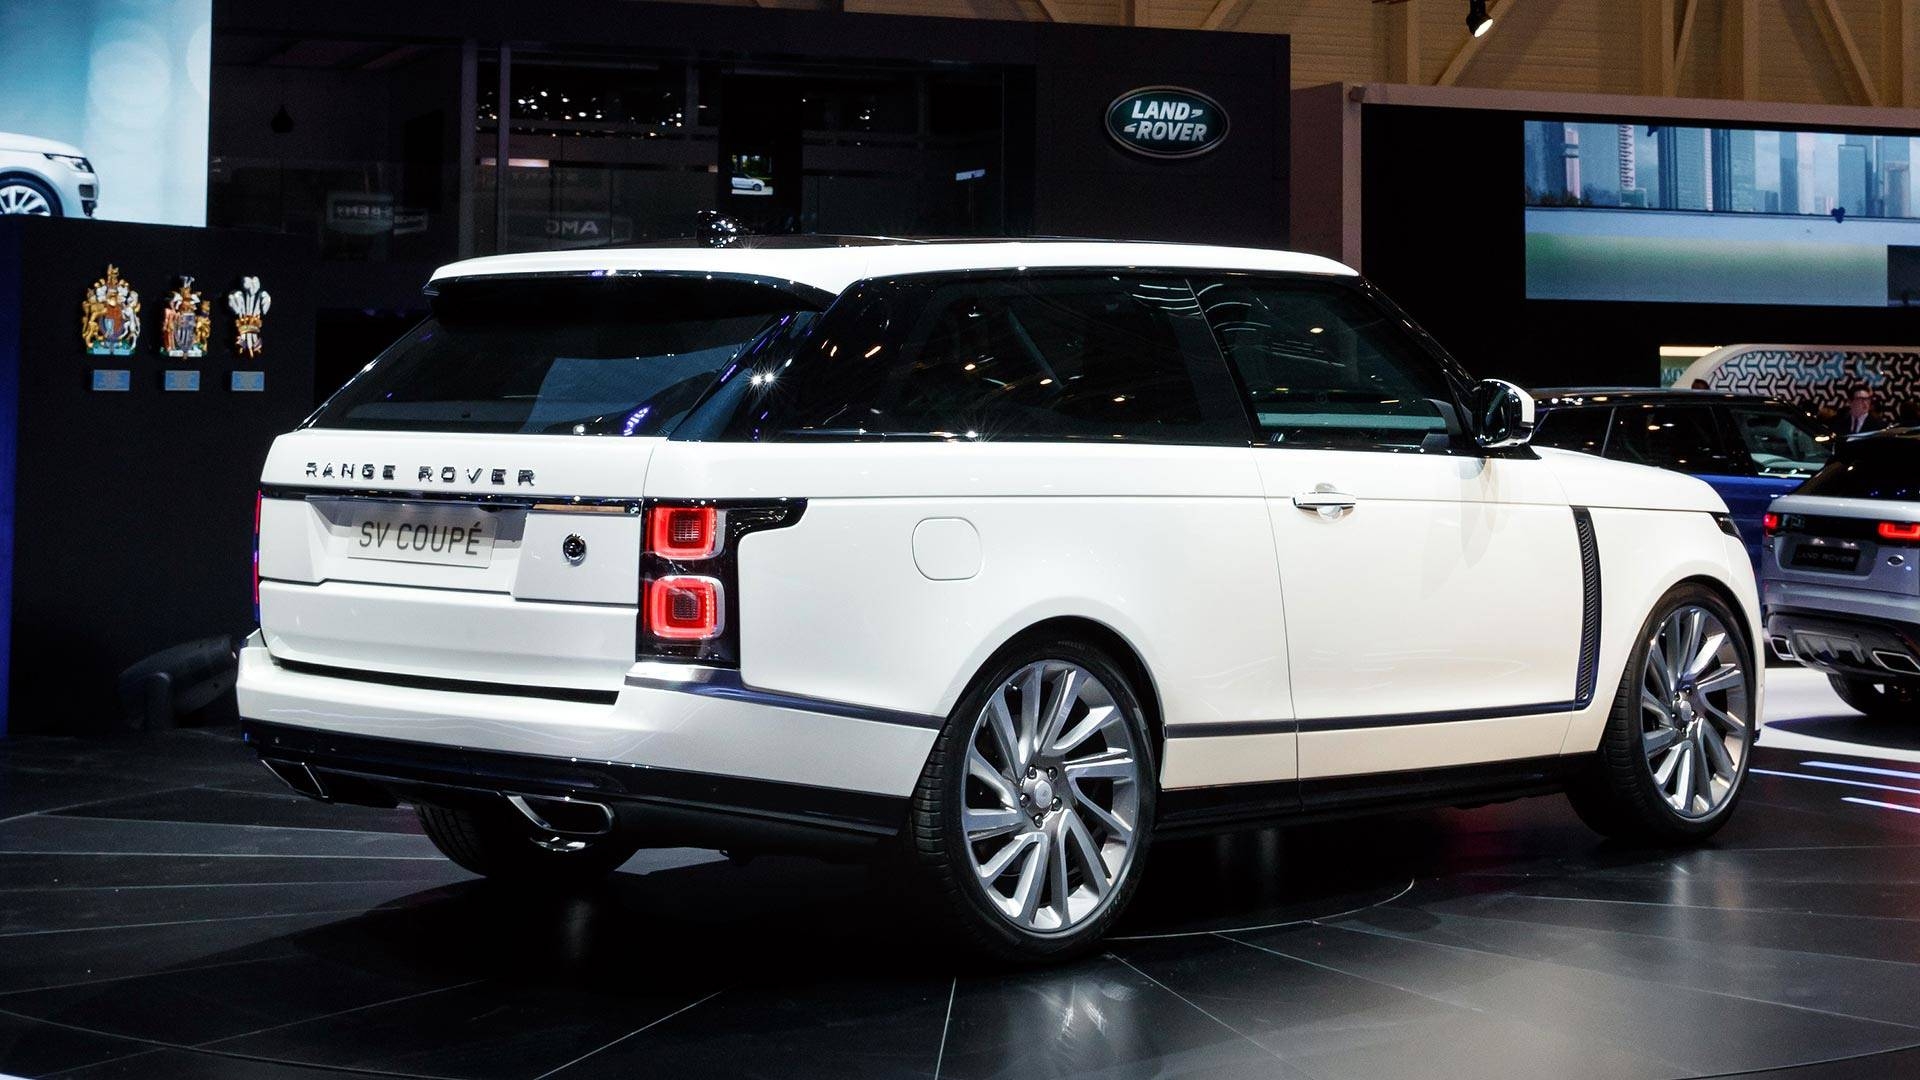 2019 Range Rover Sv Coupe - Range Rover 2019 Price , HD Wallpaper & Backgrounds